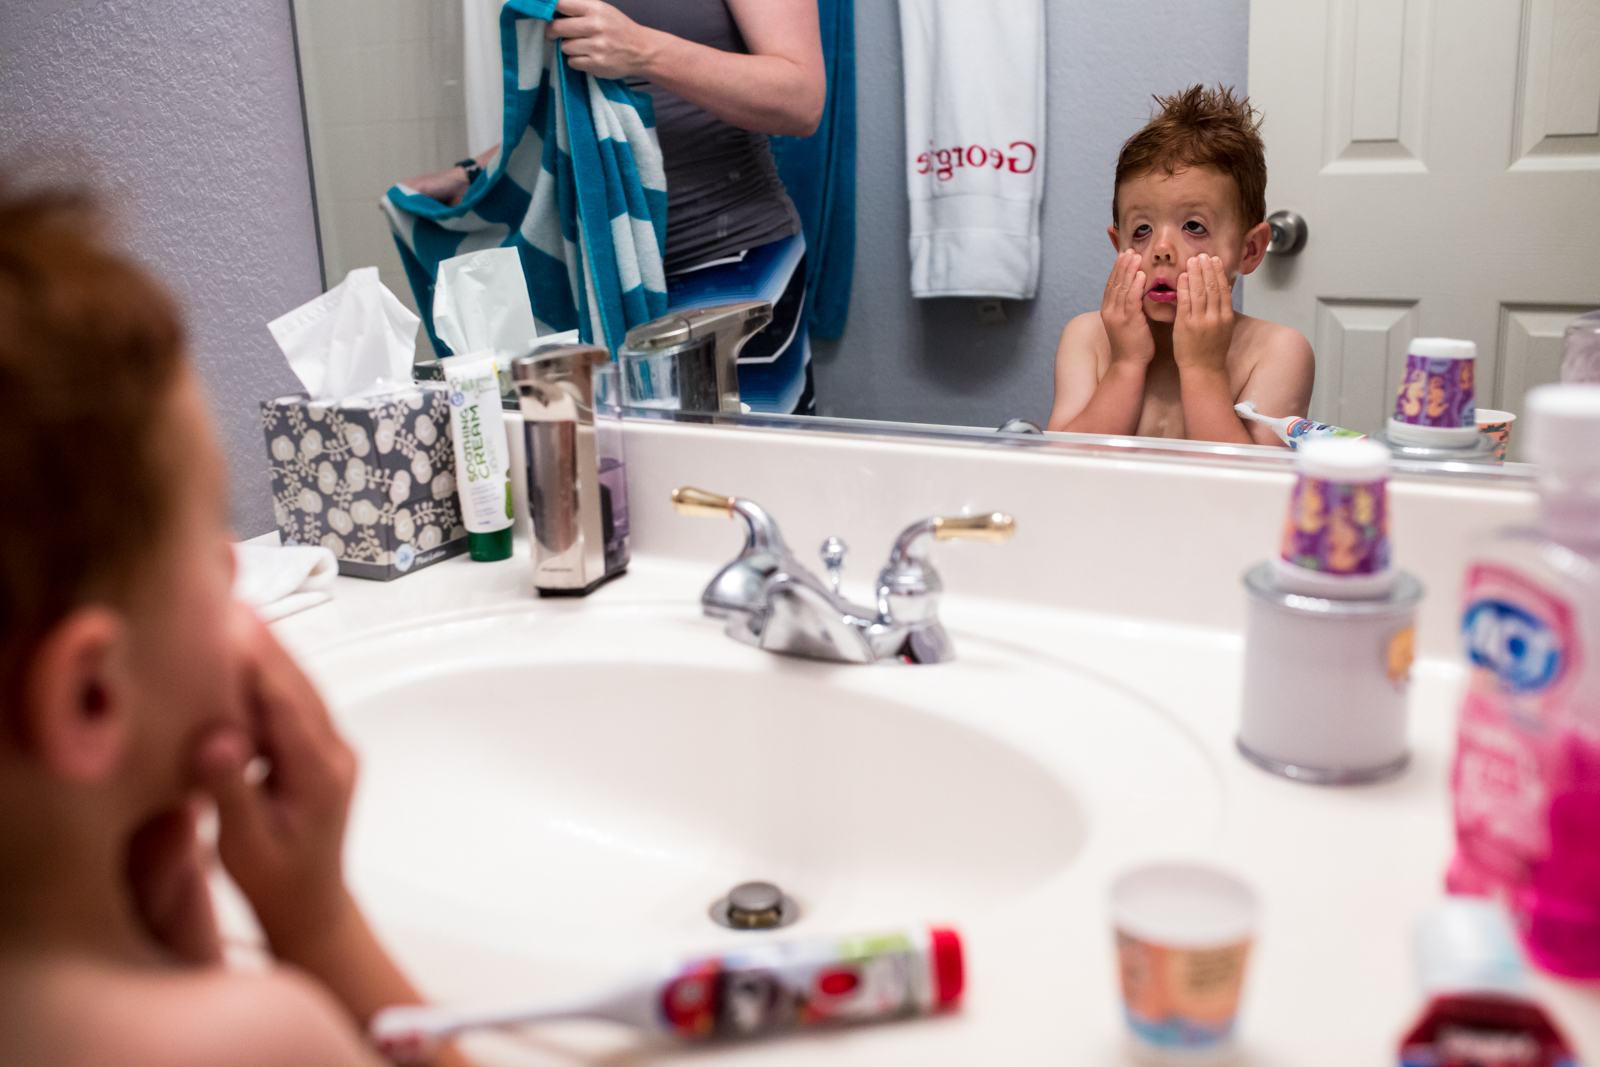 Lawren Rose Photography takes a funny photo during a maternity session of a little boy making goofy faces at himself in the bathroom mirror in mckinney texas